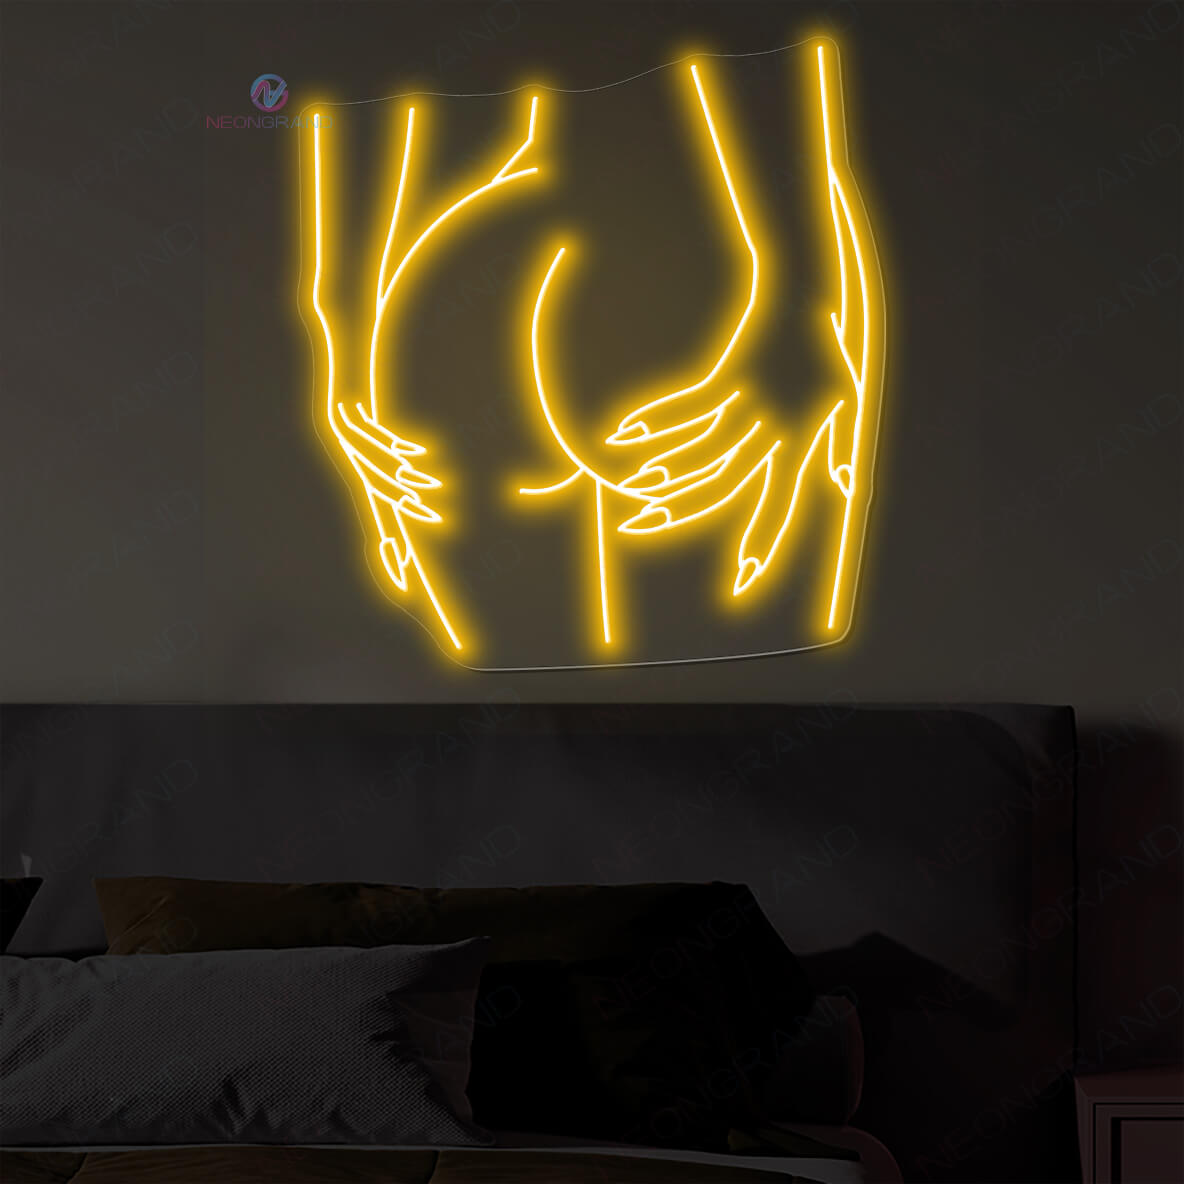 Naked Lady Neon Light Sexy Booty Art Female Body Led Neon Sign ornage yellow